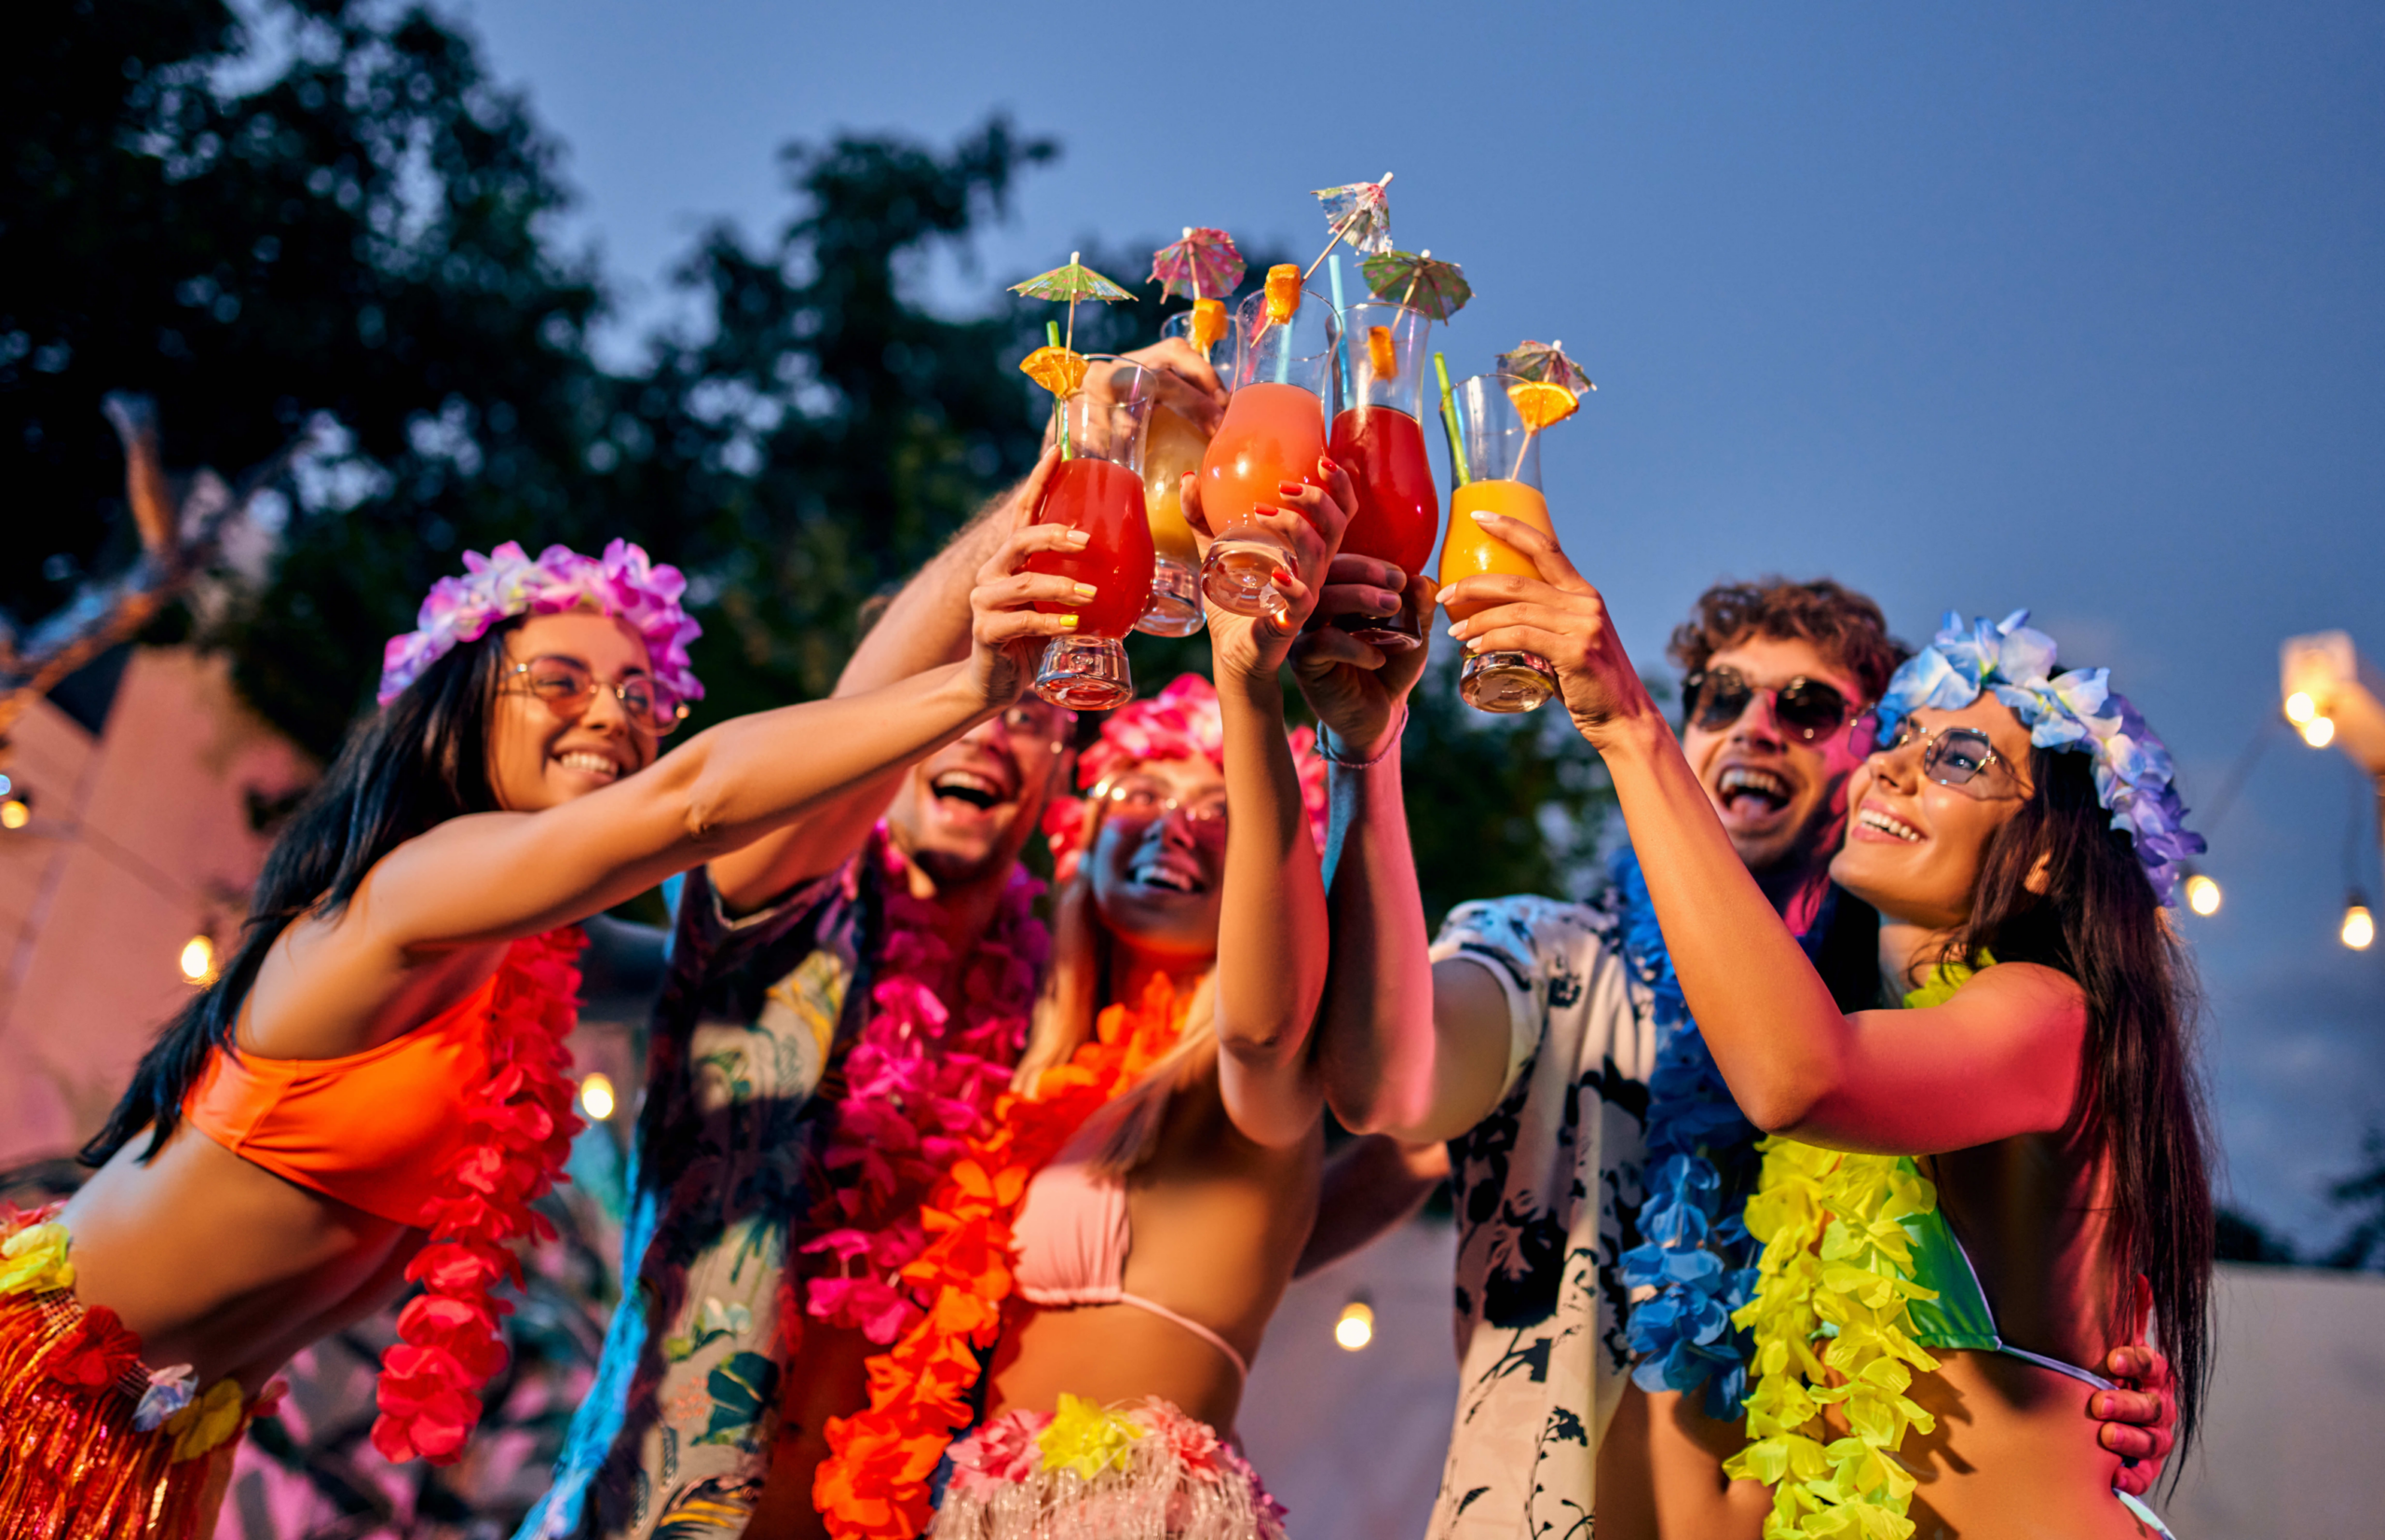 young people cheering cocktail drinks at a tropical party